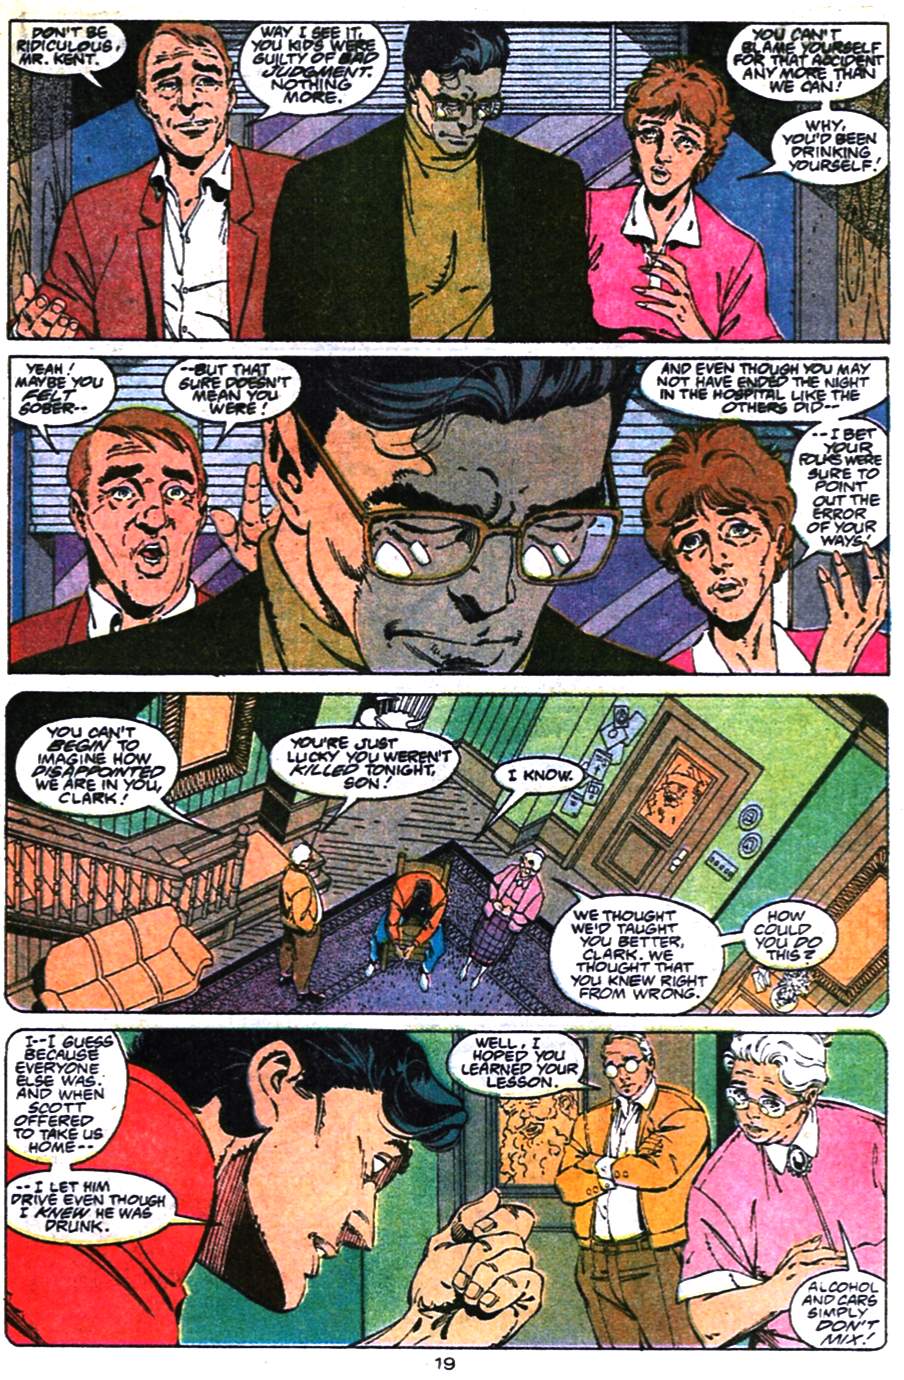 Adventures of Superman (1987) 474 Page 19